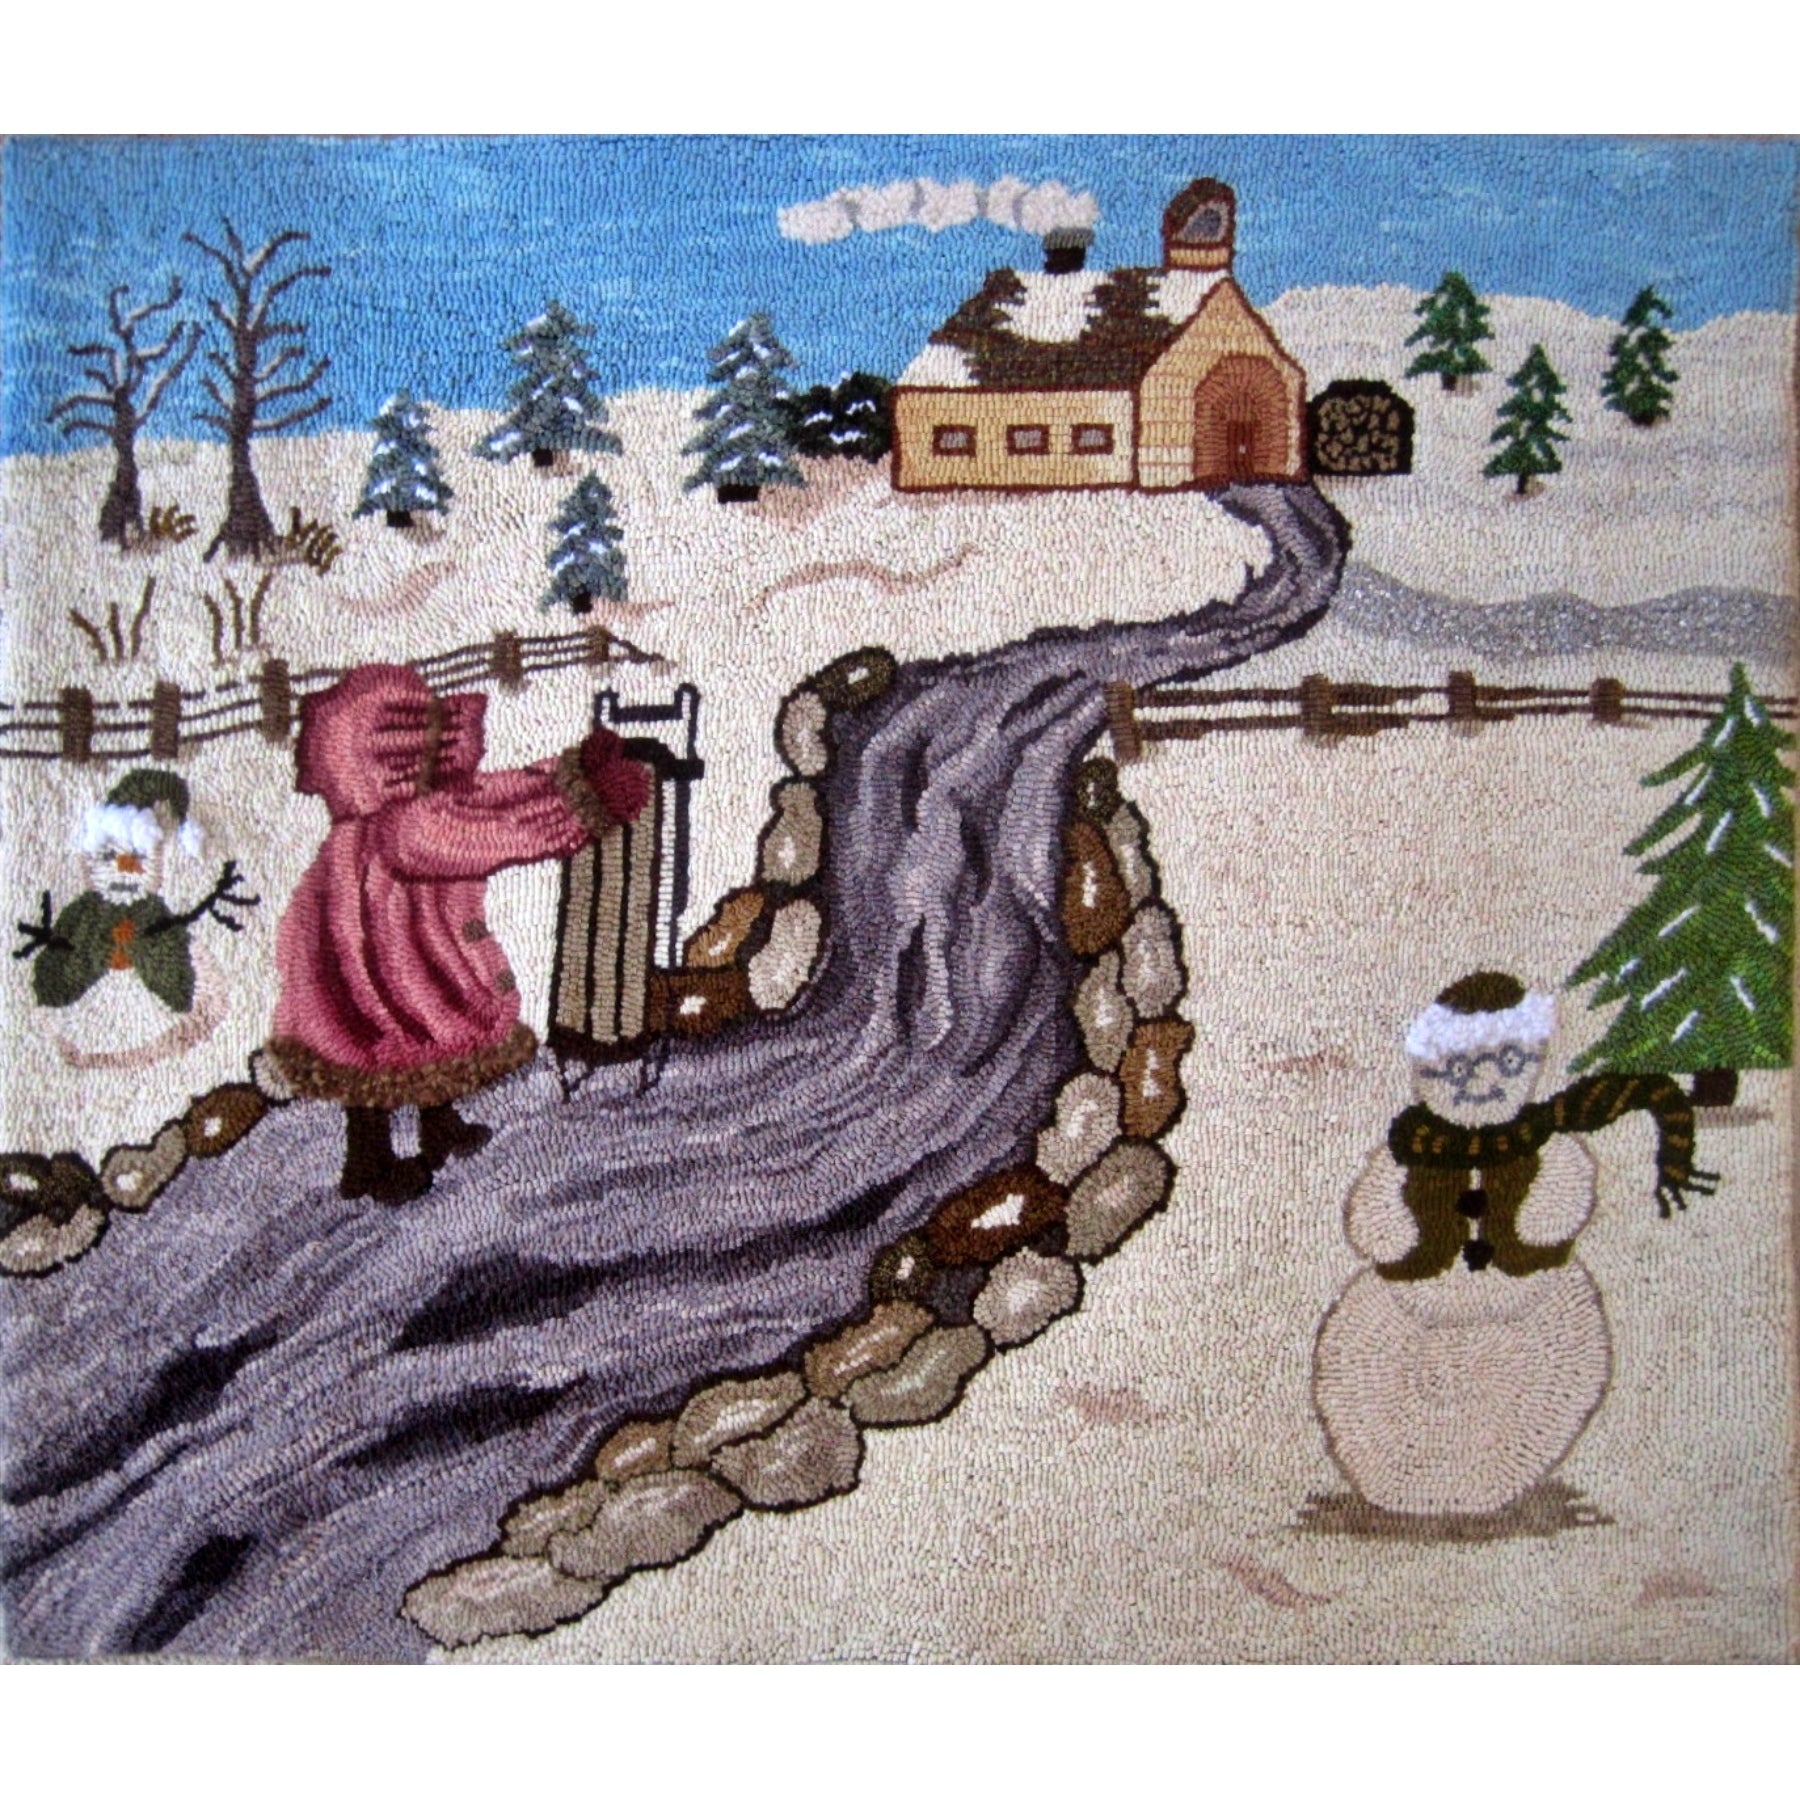 On The Way To School, rug hooked by Betty Rafferty